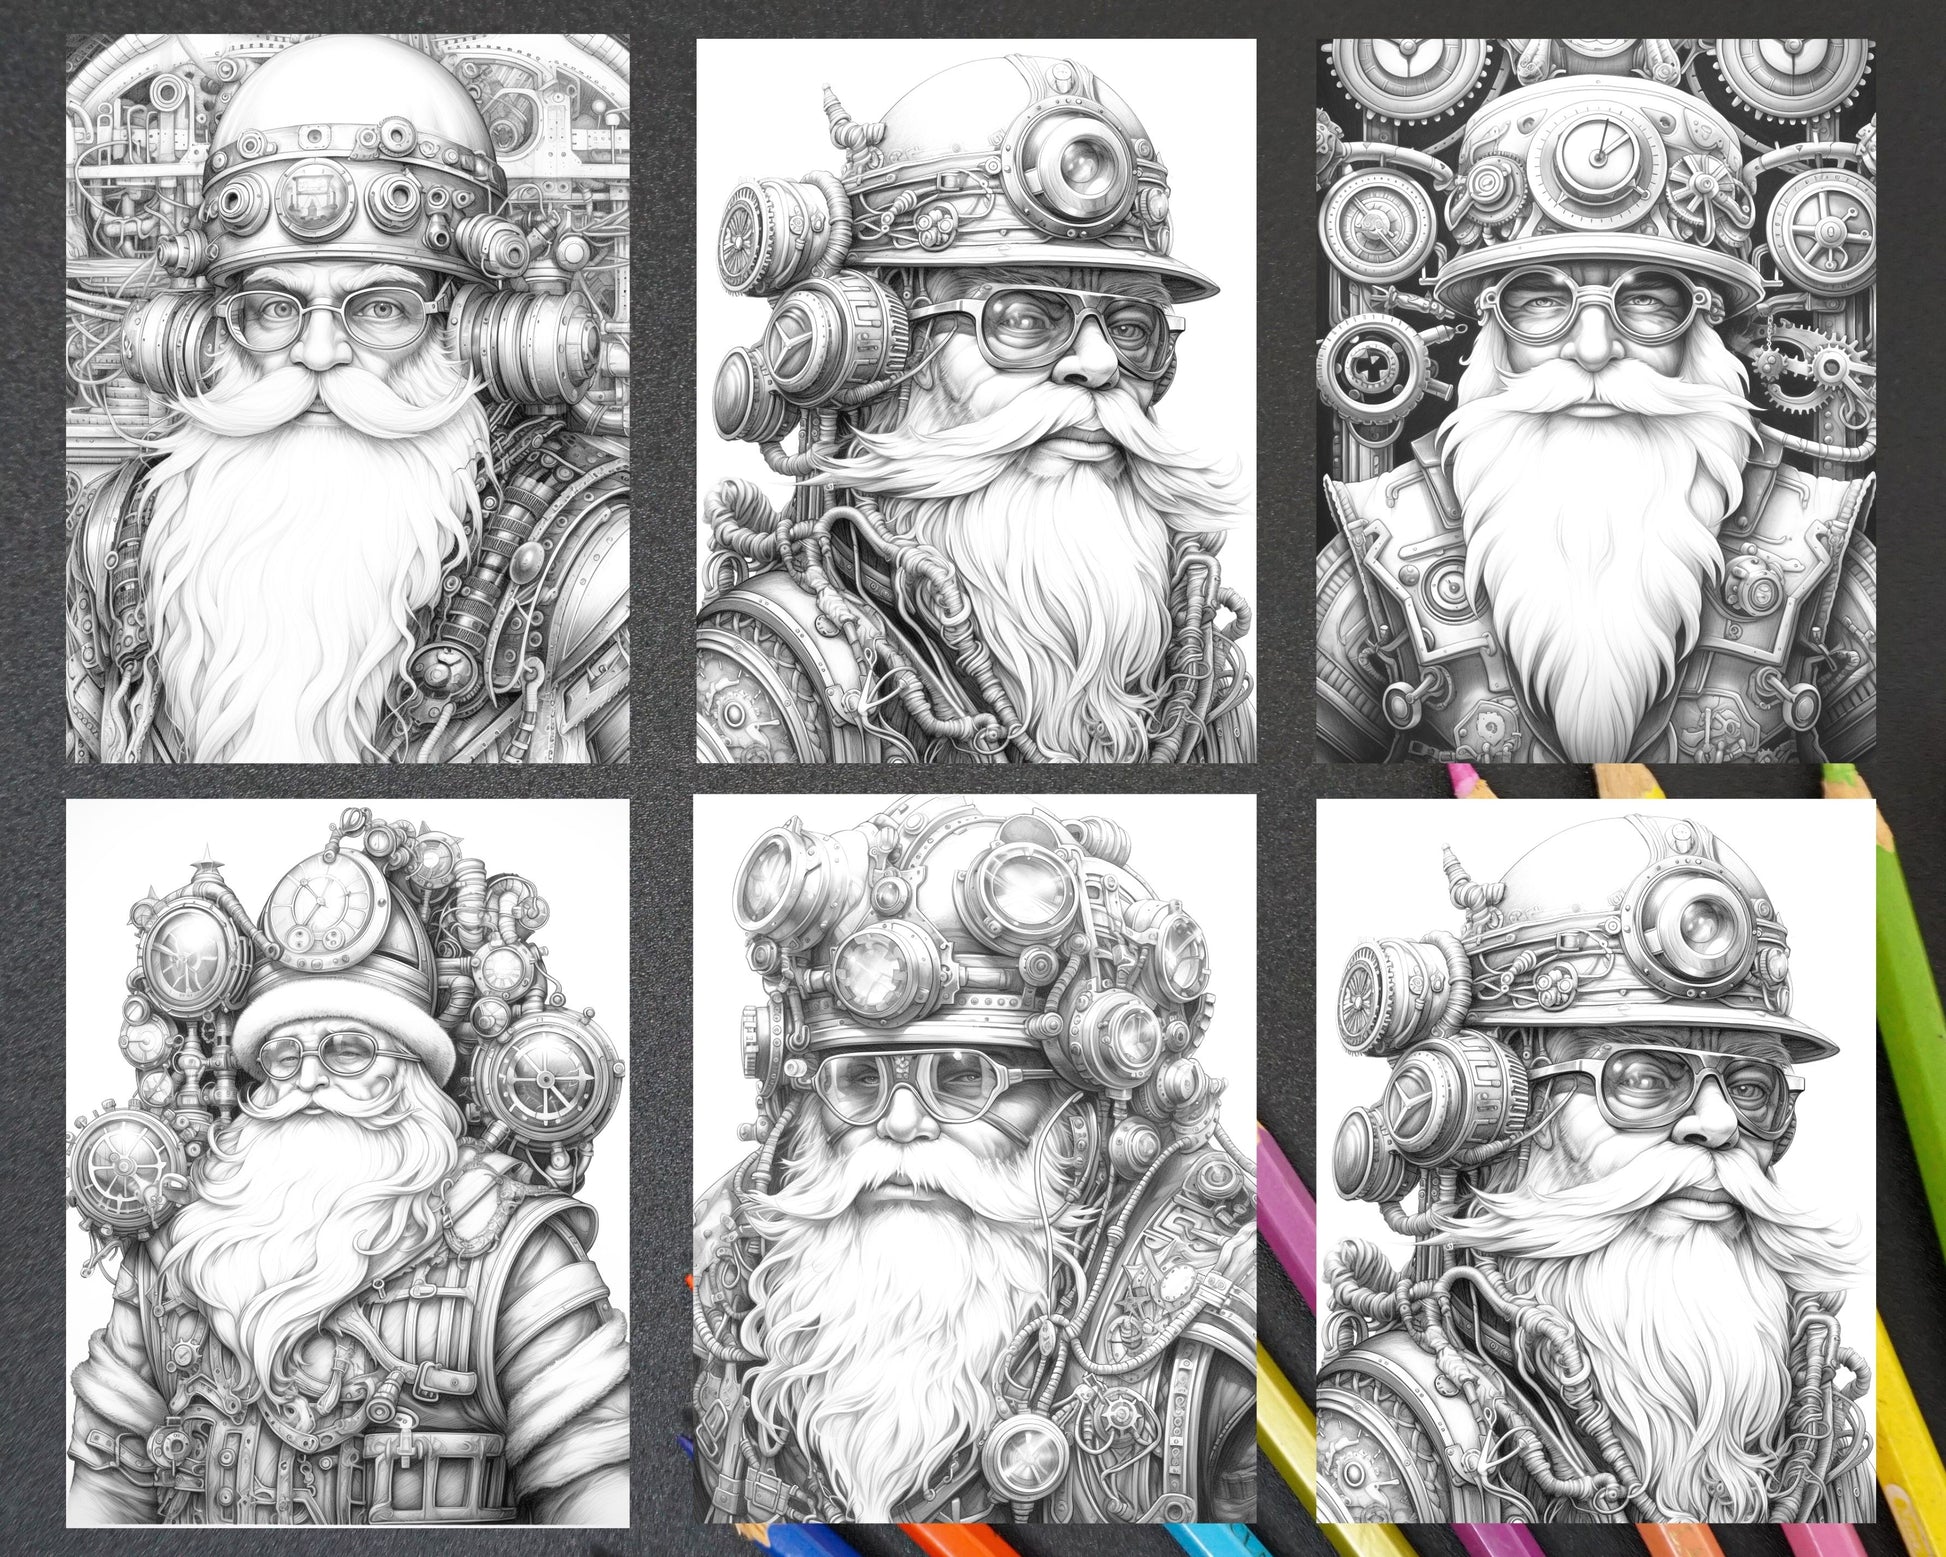 Steampunk Santa Claus Coloring Pages, Grayscale Coloring Pages for Adults, Adult Coloring Page Download, Christmas Coloring Pages, Christmas Coloring Pages for Adults, Xmas Coloring Pages, Portrait Coloring Pages for Adults, Steampunk Coloring Pages, Santa Claus Coloring Pages, Christmas Coloring Sheets